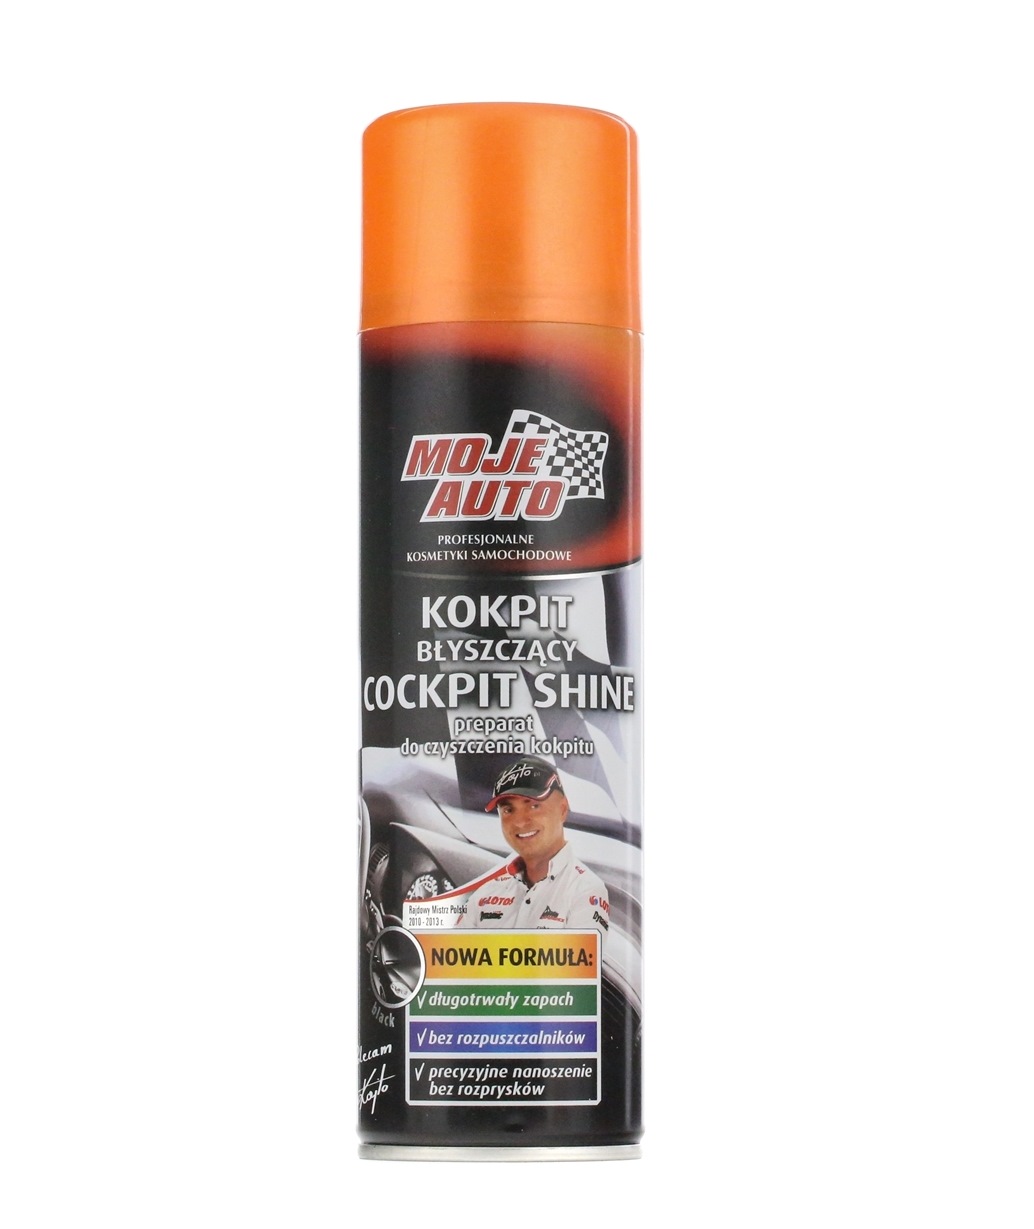 MOJE AUTO 19571 Synthetic Material Care Products Glossy, Capacity: 500ml, aerosol